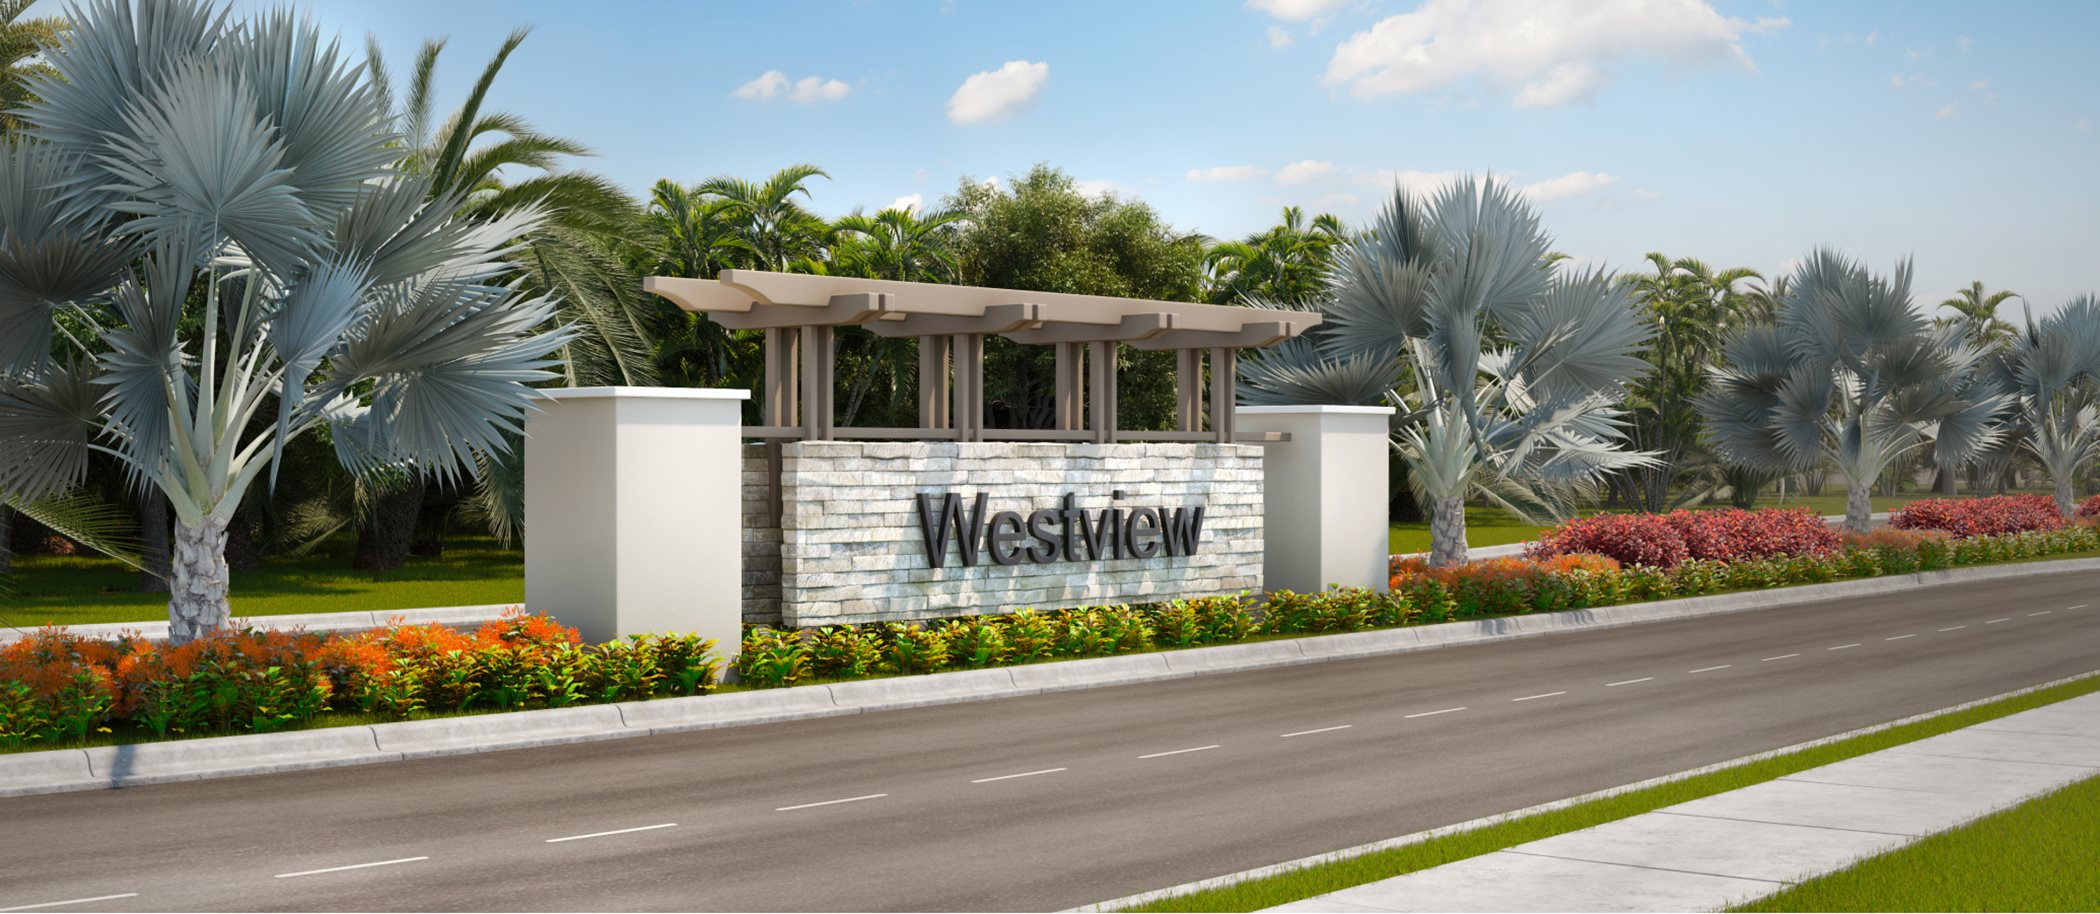 Westview entry sign